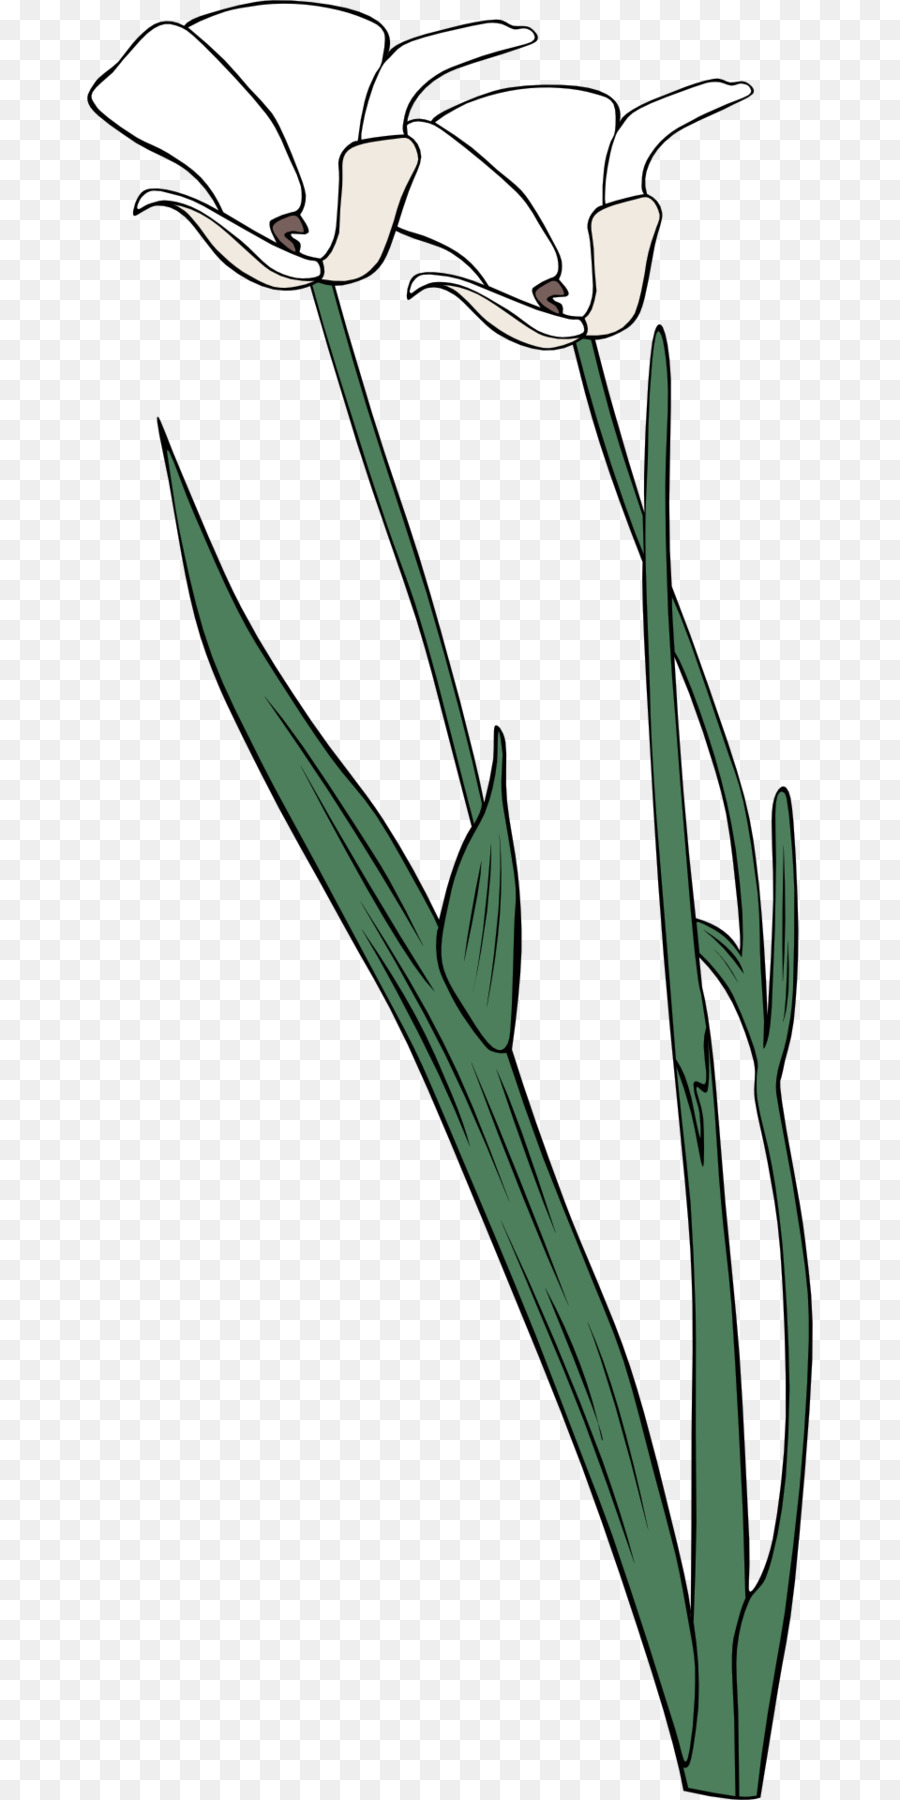 Clipart - Lily of the Valley